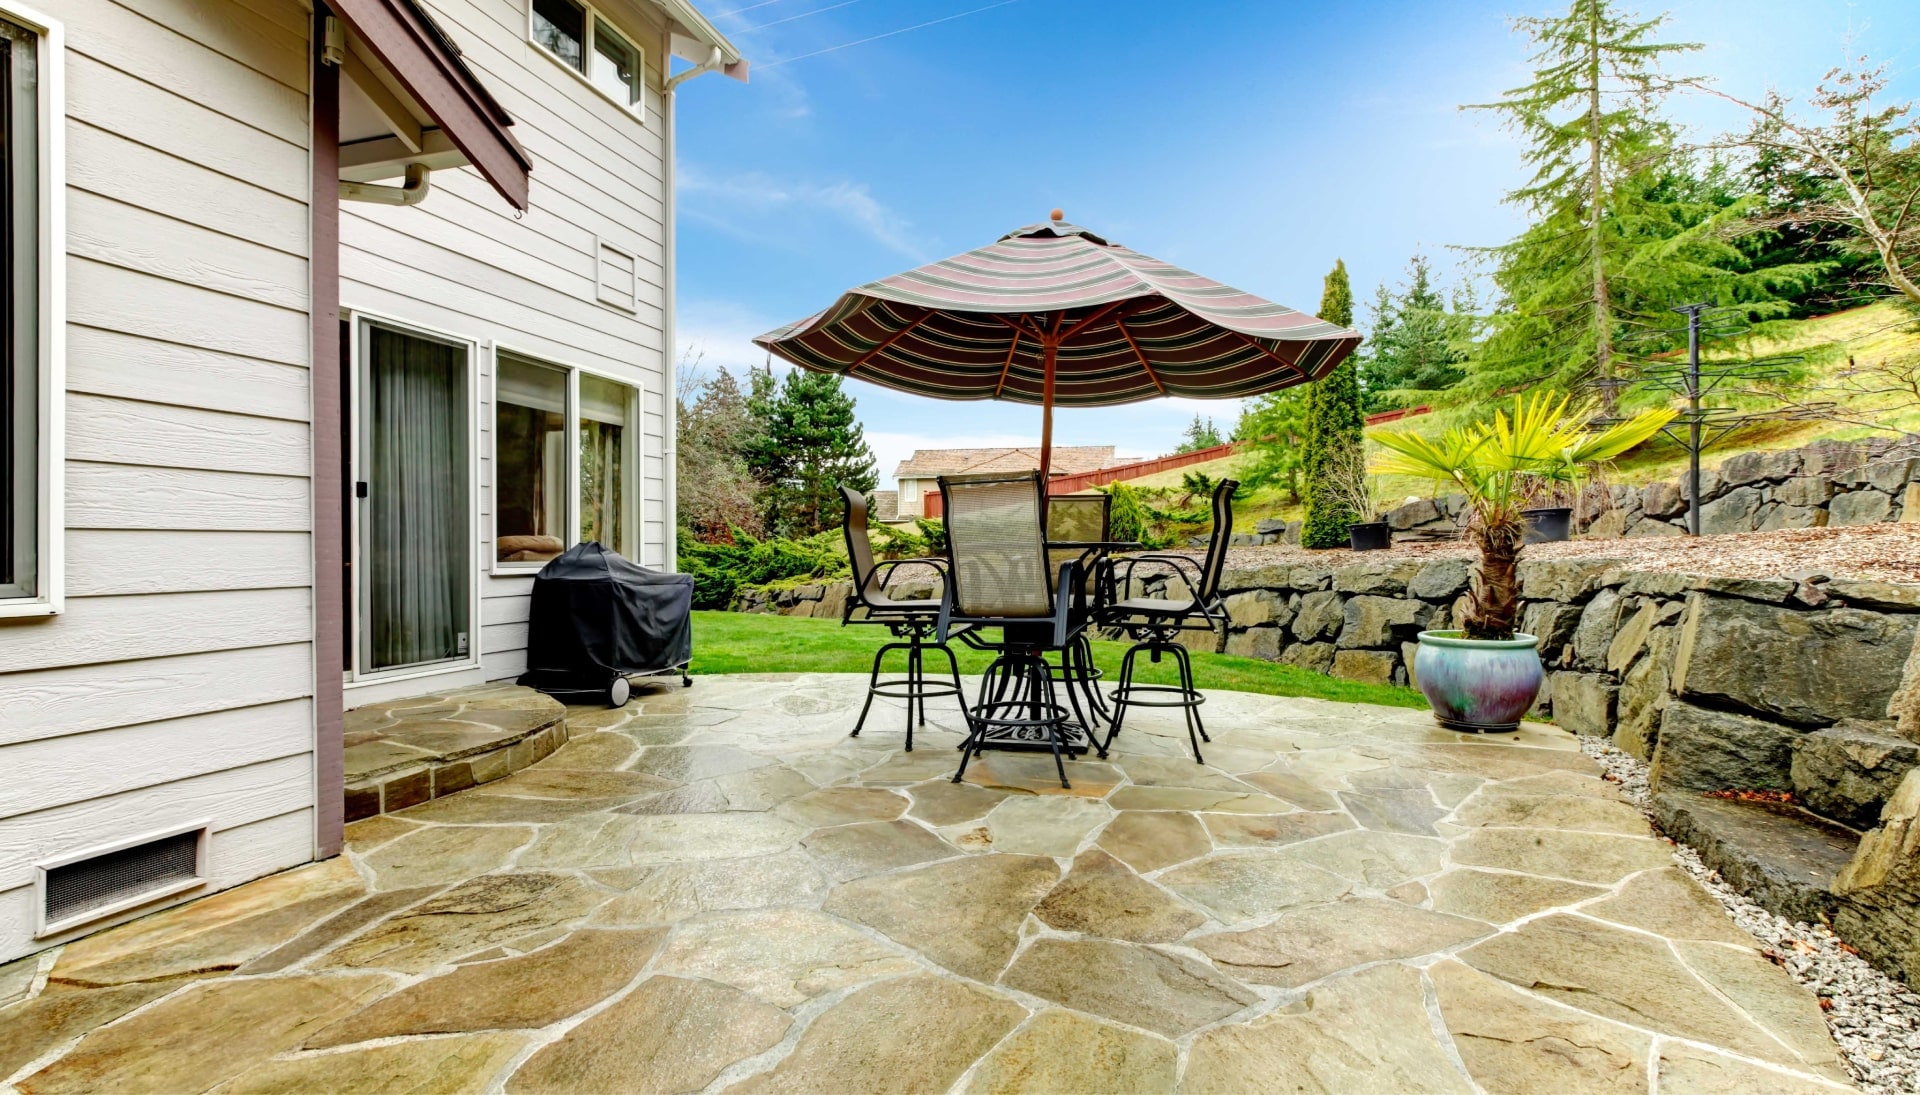 Beautifully Textured and Patterned Concrete Patios in Waukesha, Wisconsin area!